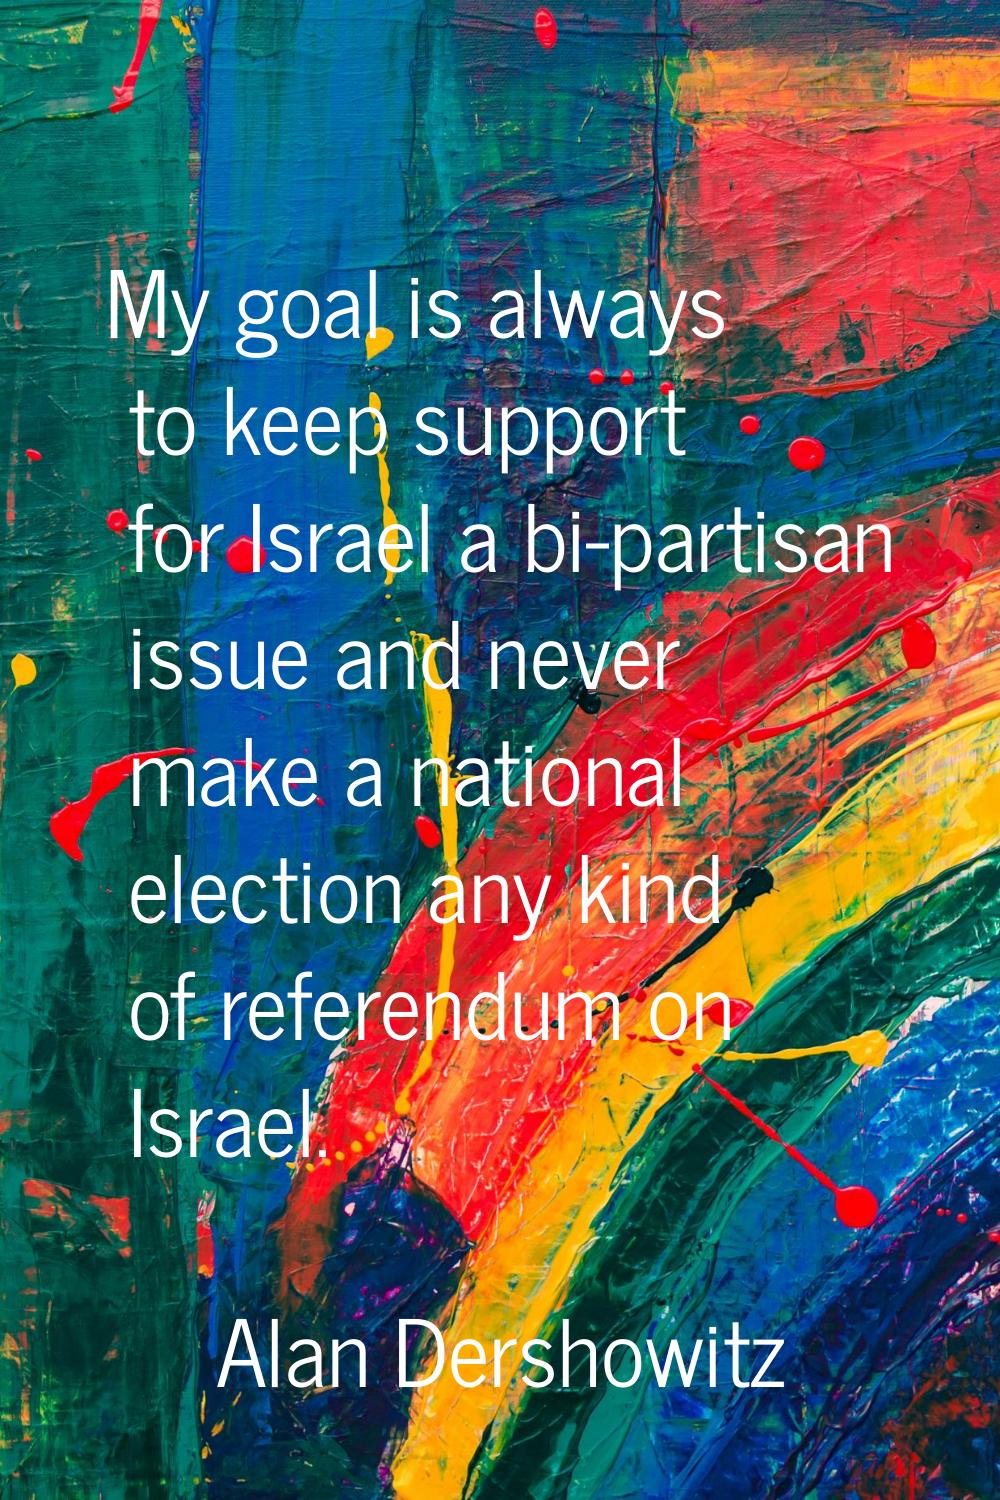 My goal is always to keep support for Israel a bi-partisan issue and never make a national election